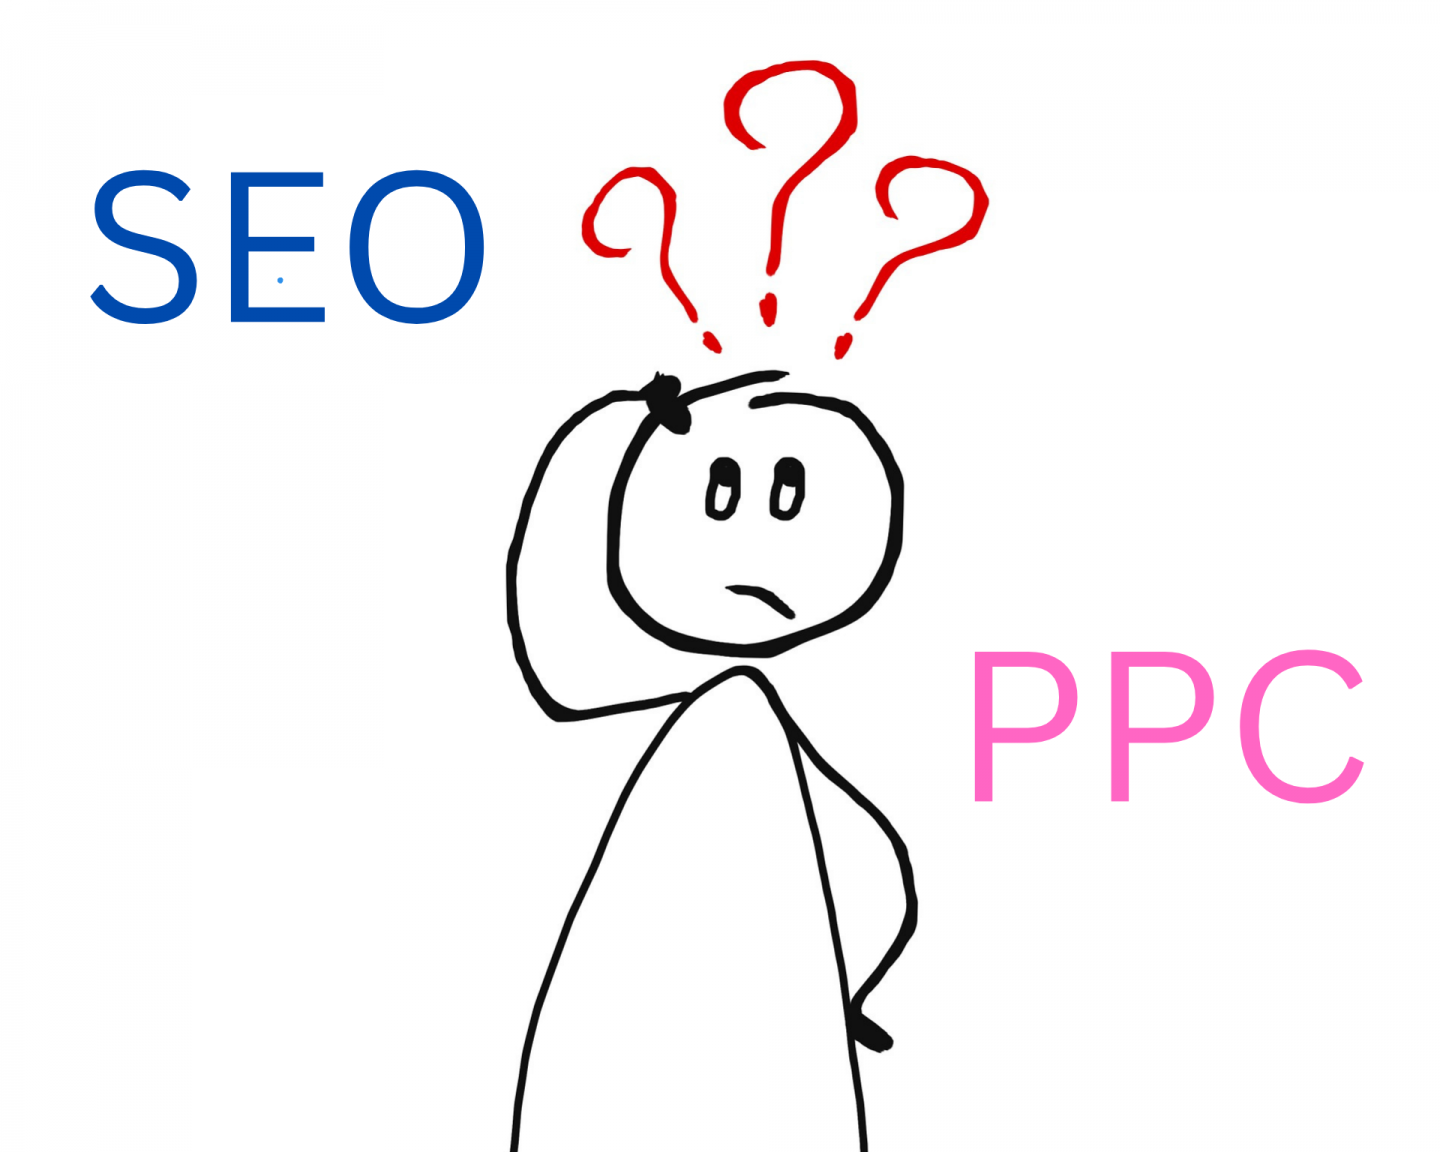 PPC vs. SEO in Grant Writing: What Works Best in 2023?